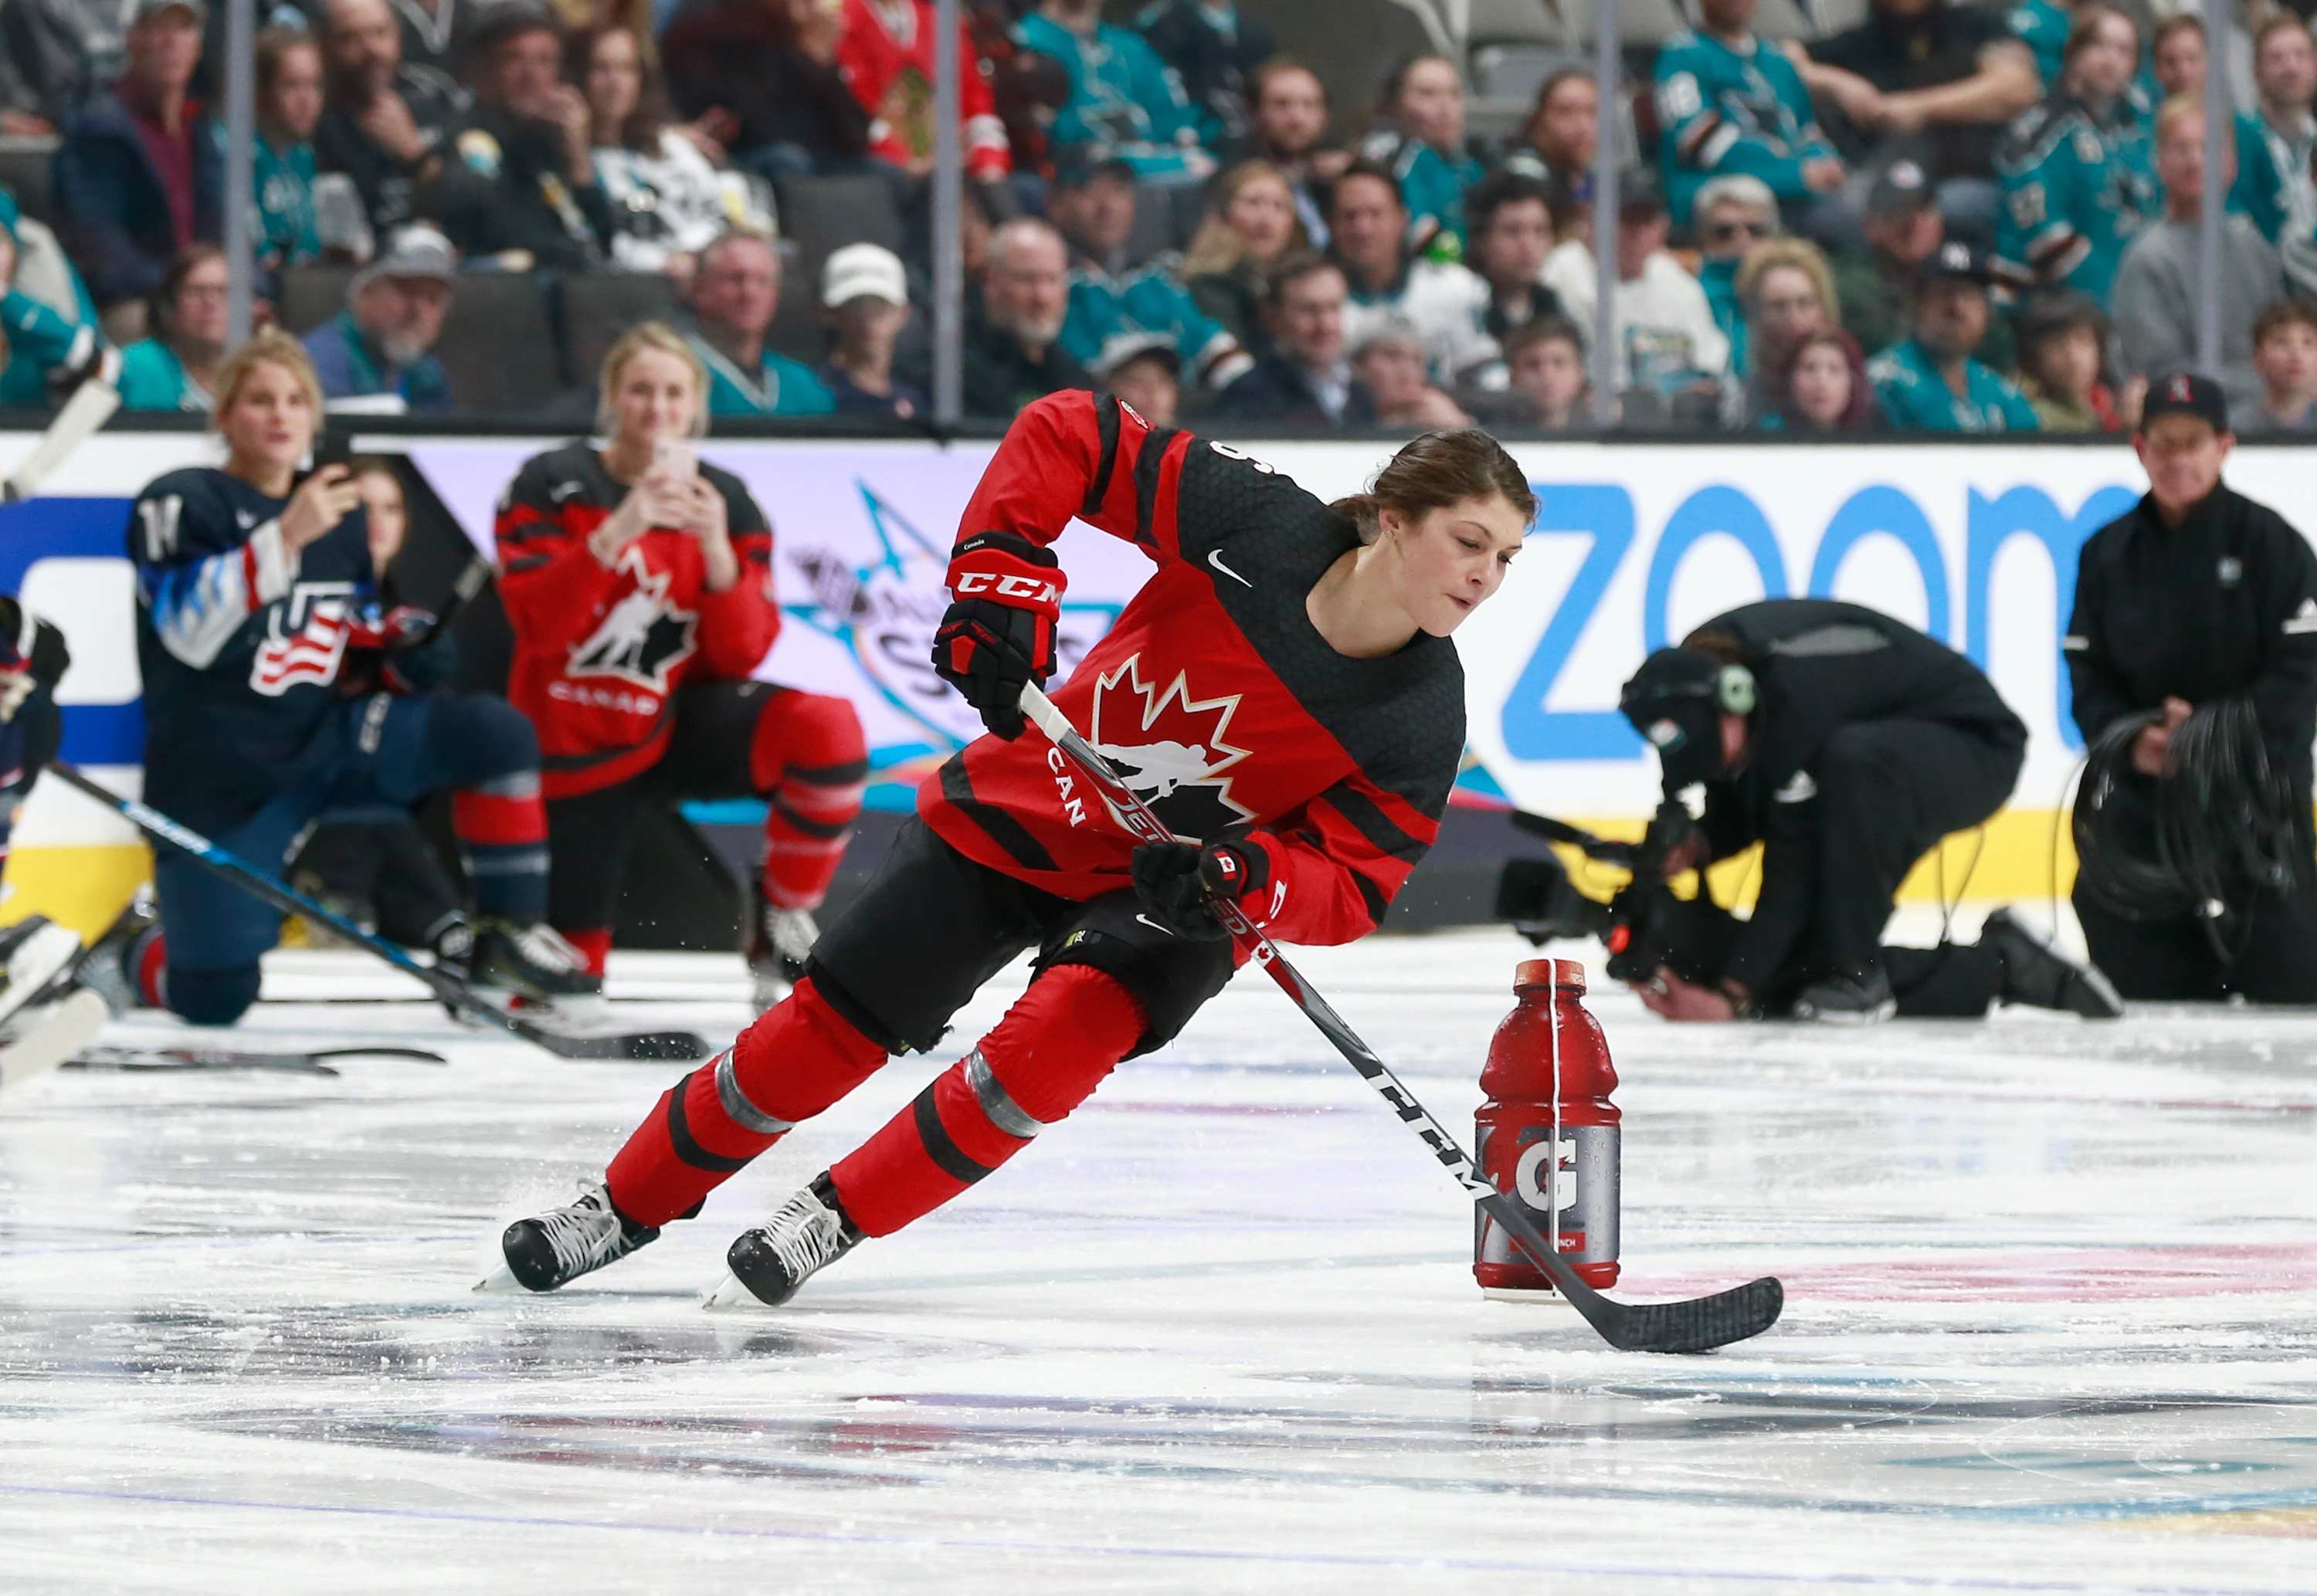 Rebecca Johnston #6 of the Canadian Women’s National team skates during the Gatorade NHL Puck Control during the 2019 SAP NHL All-Star Skills